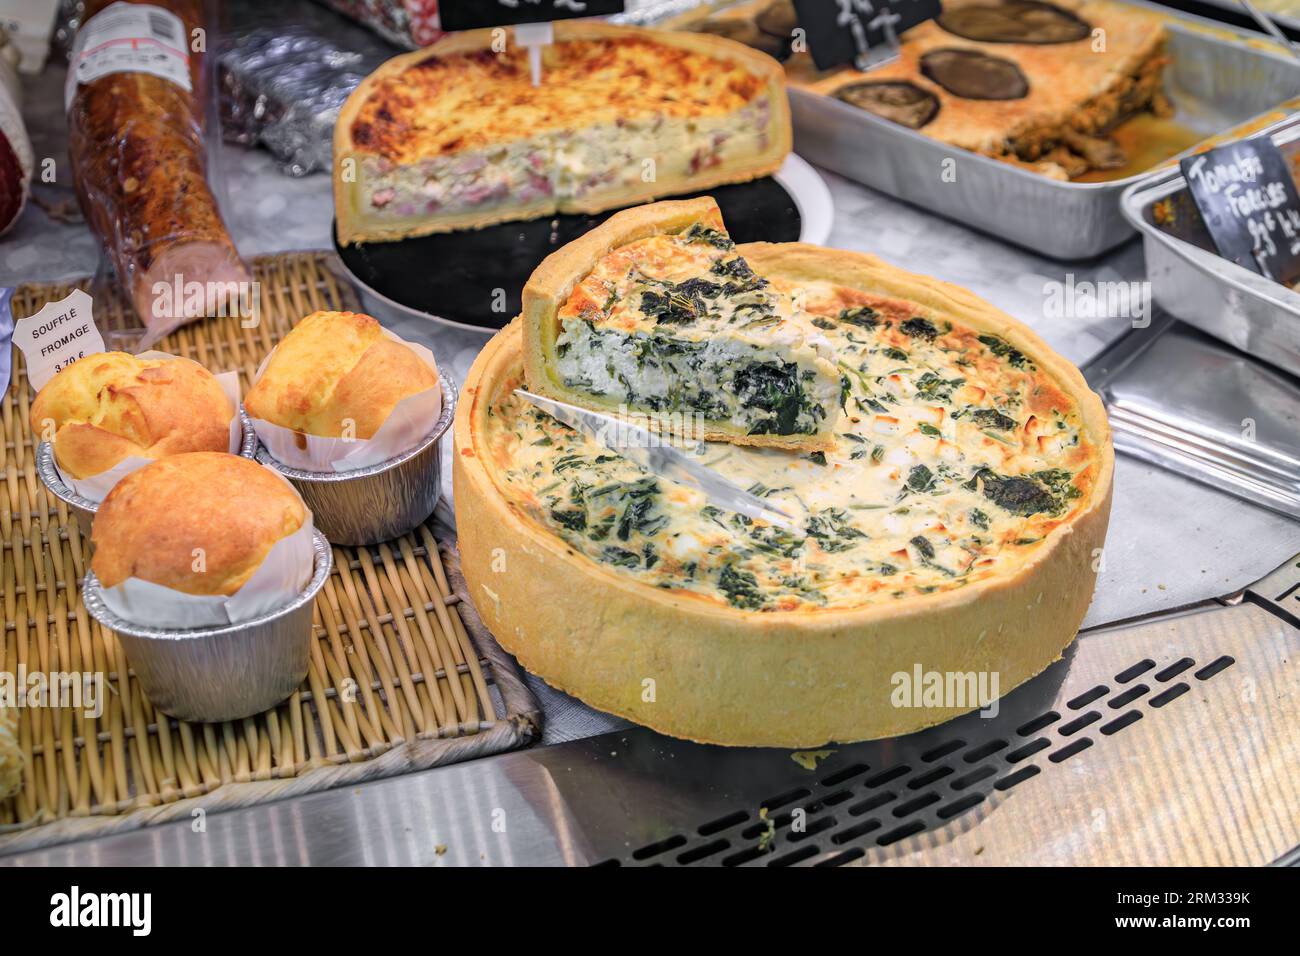 Quiche with spinach, quiche lorraine with ham and cheese, cheese souffle at a farmers market in the Old Town Menton, French Riviera, South of France Stock Photo